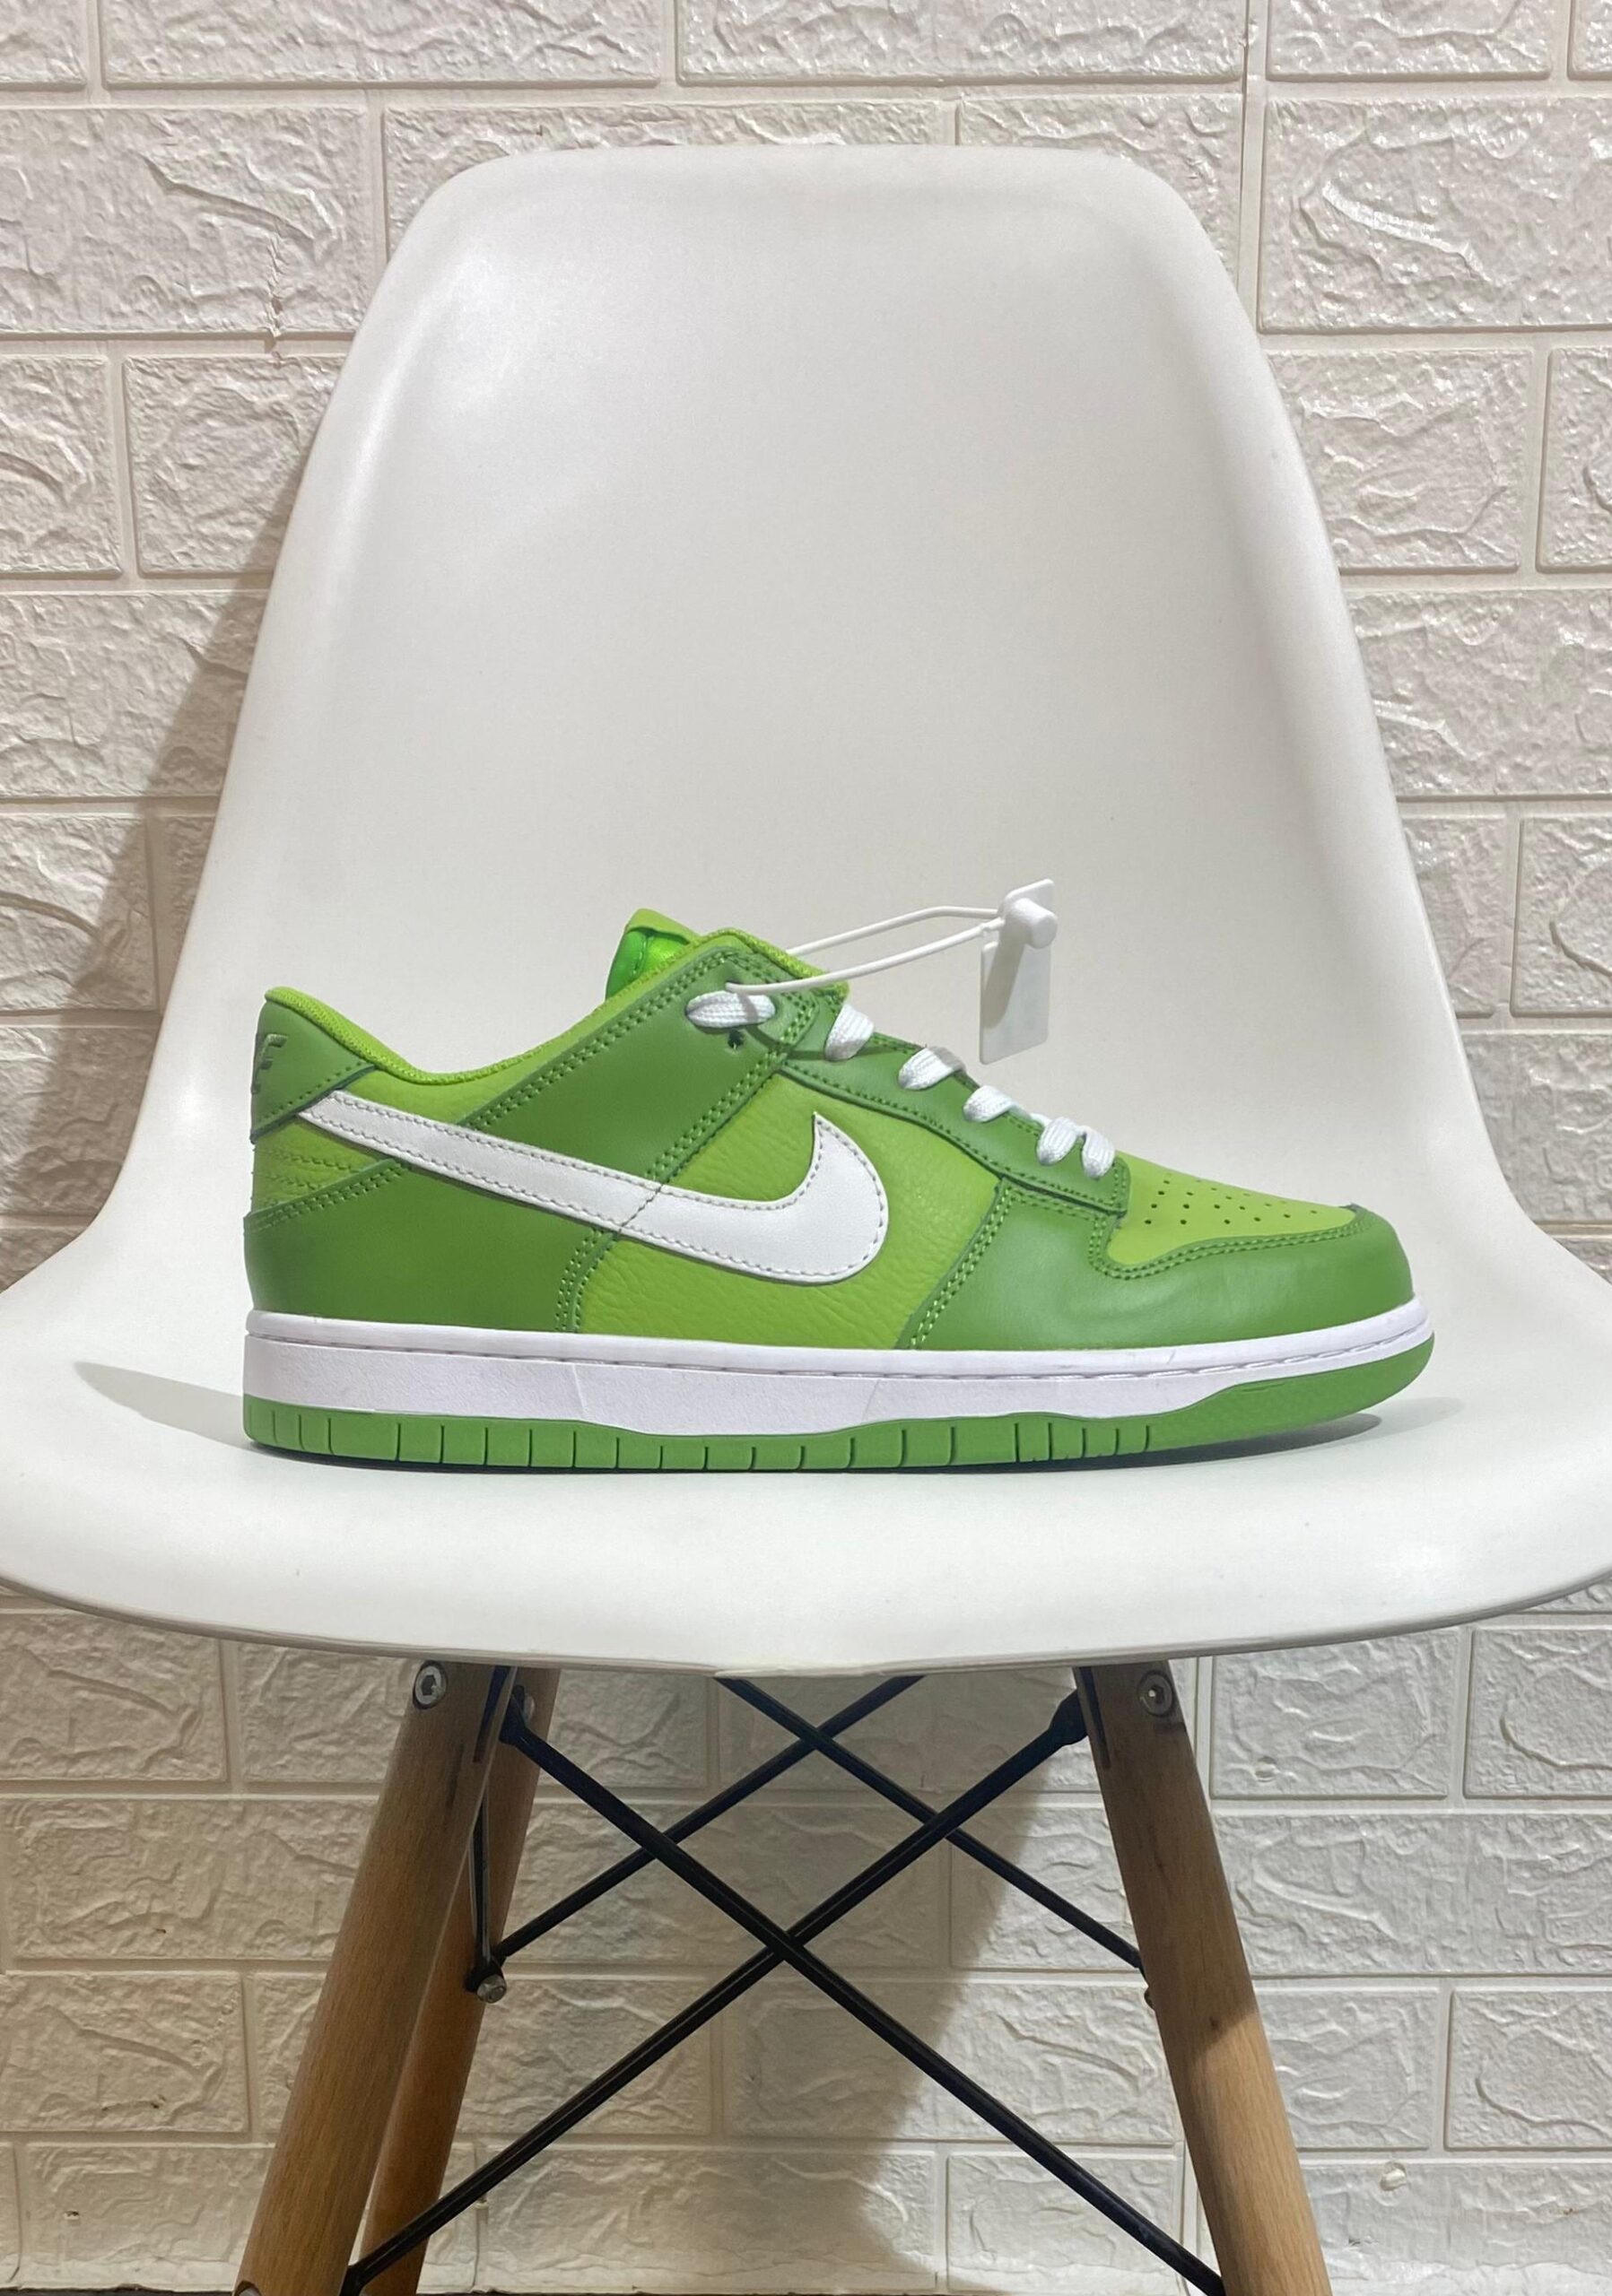 Dunk Green Chlorophyll Sneakers In Stock